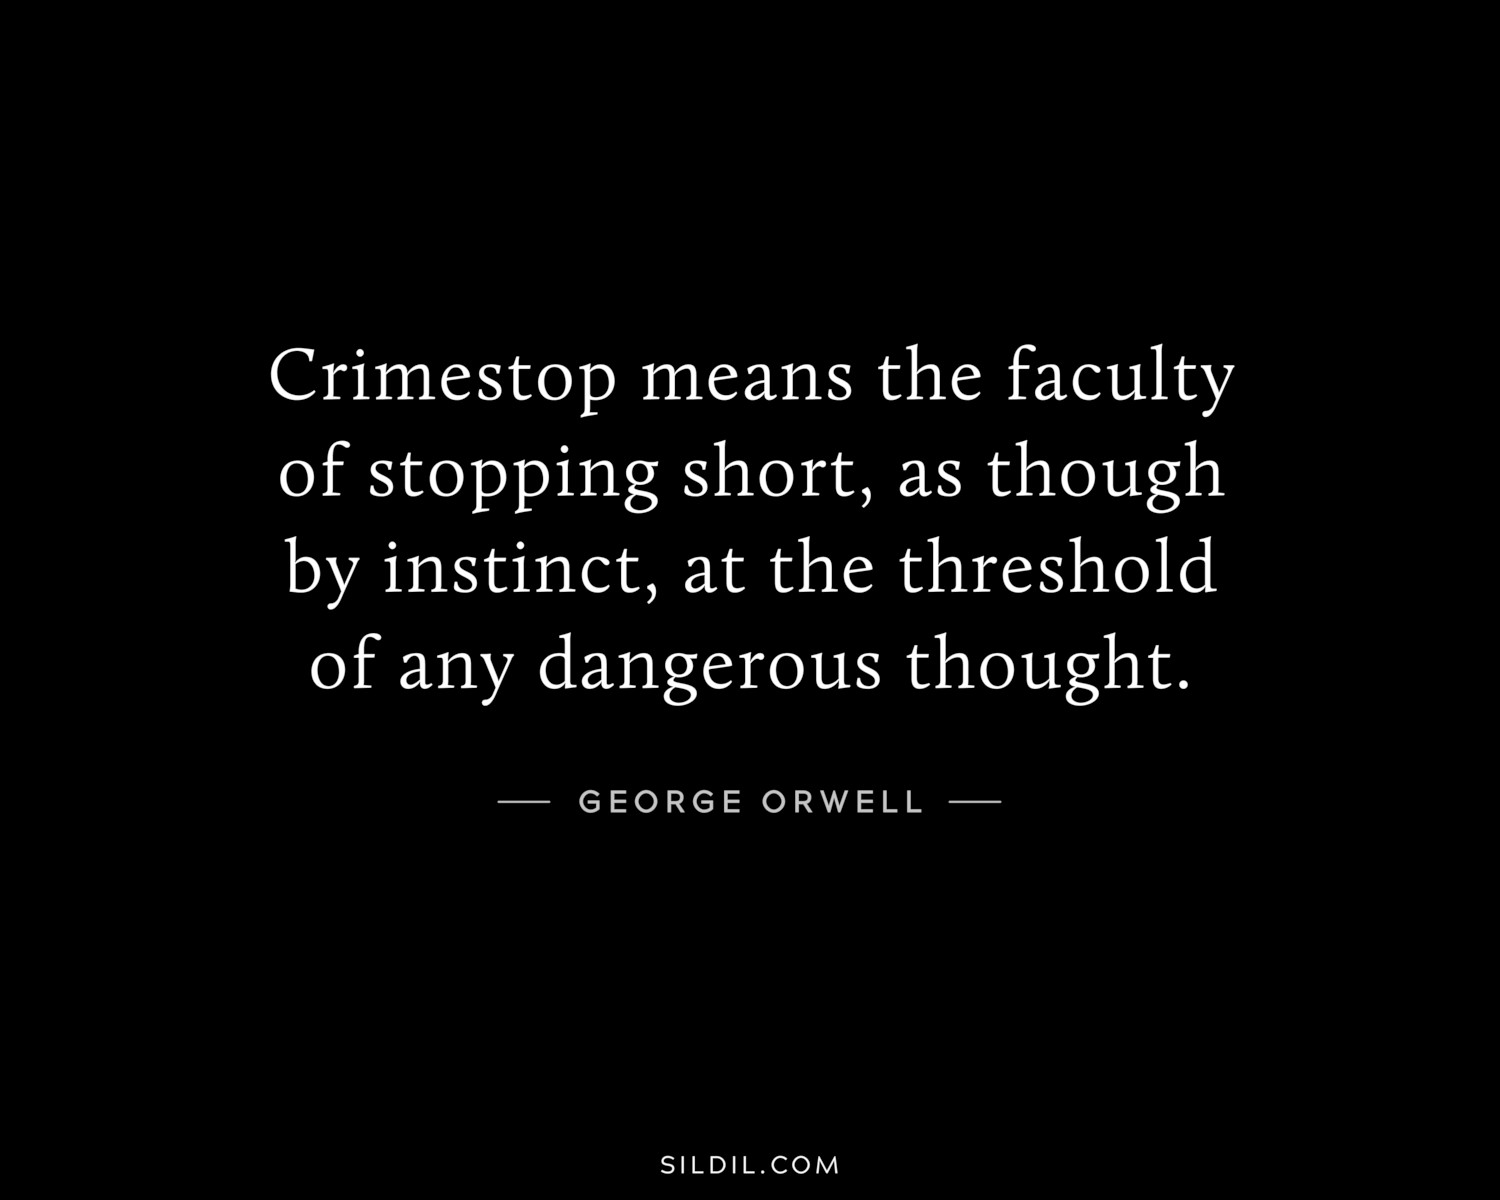 Crimestop means the faculty of stopping short, as though by instinct, at the threshold of any dangerous thought.